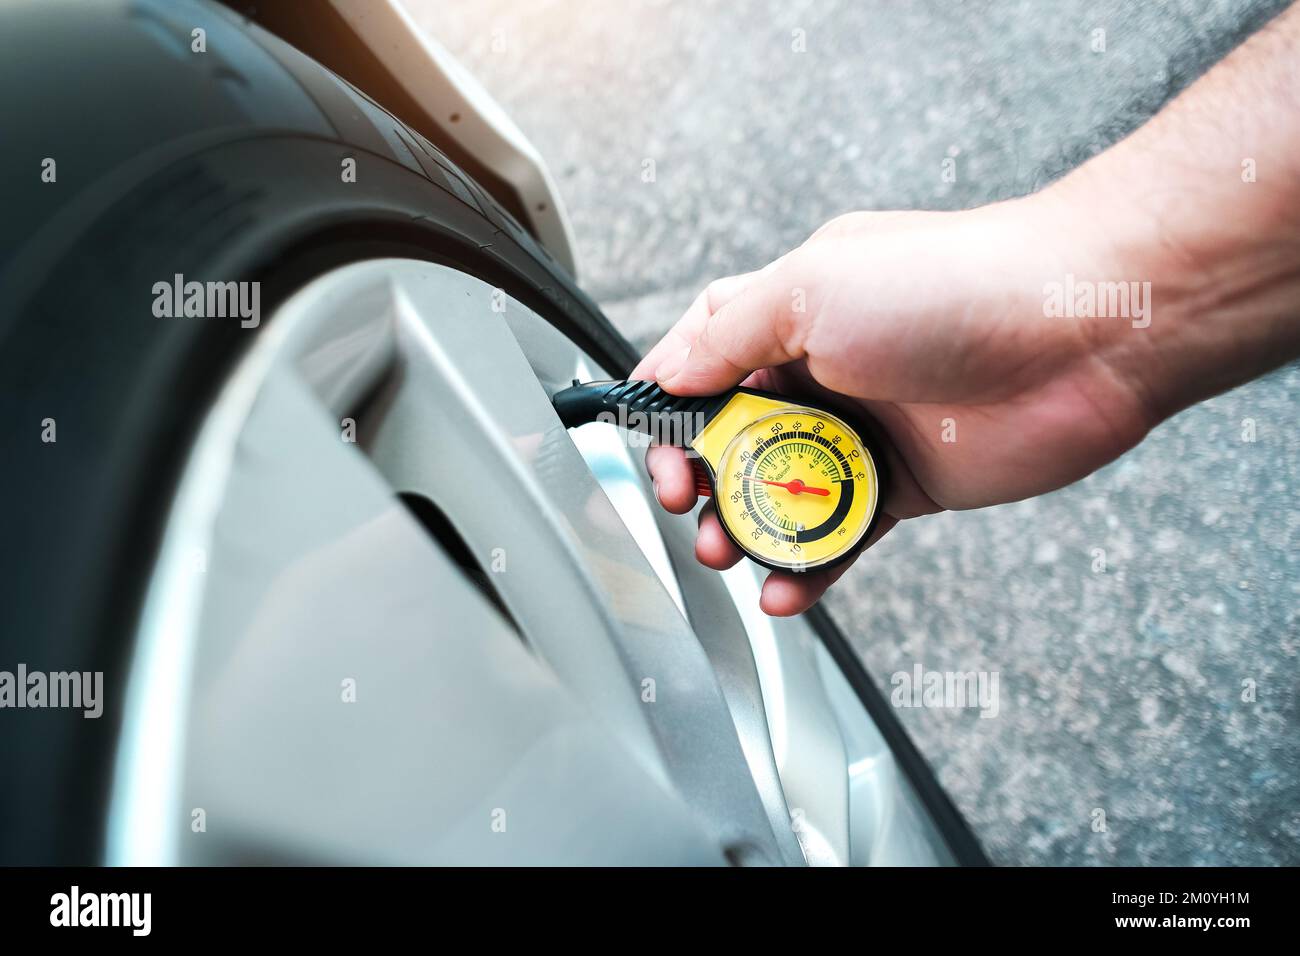 The driver is measuring the tire pressure with a  standard tire pressure gauge, auto maintenance service concept Stock Photo